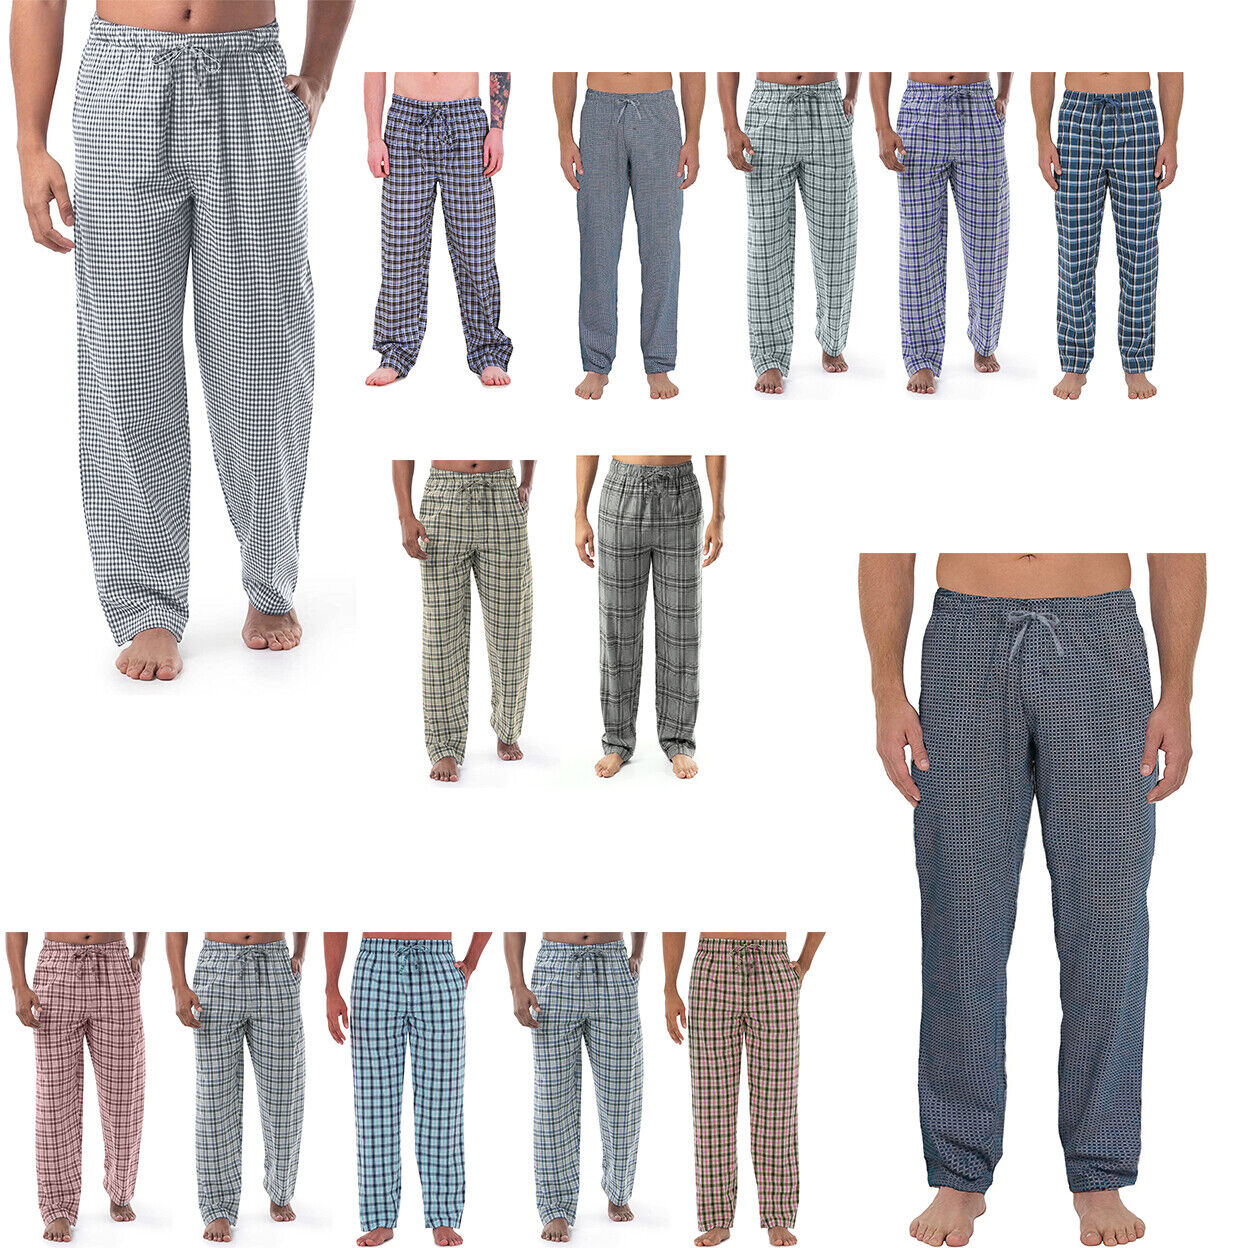 2-Pack: Men's Ultra-Soft Solid & Plaid Cotton Jersey Knit Comfy Sleep Lounge Pajama Pants - Solid, Small